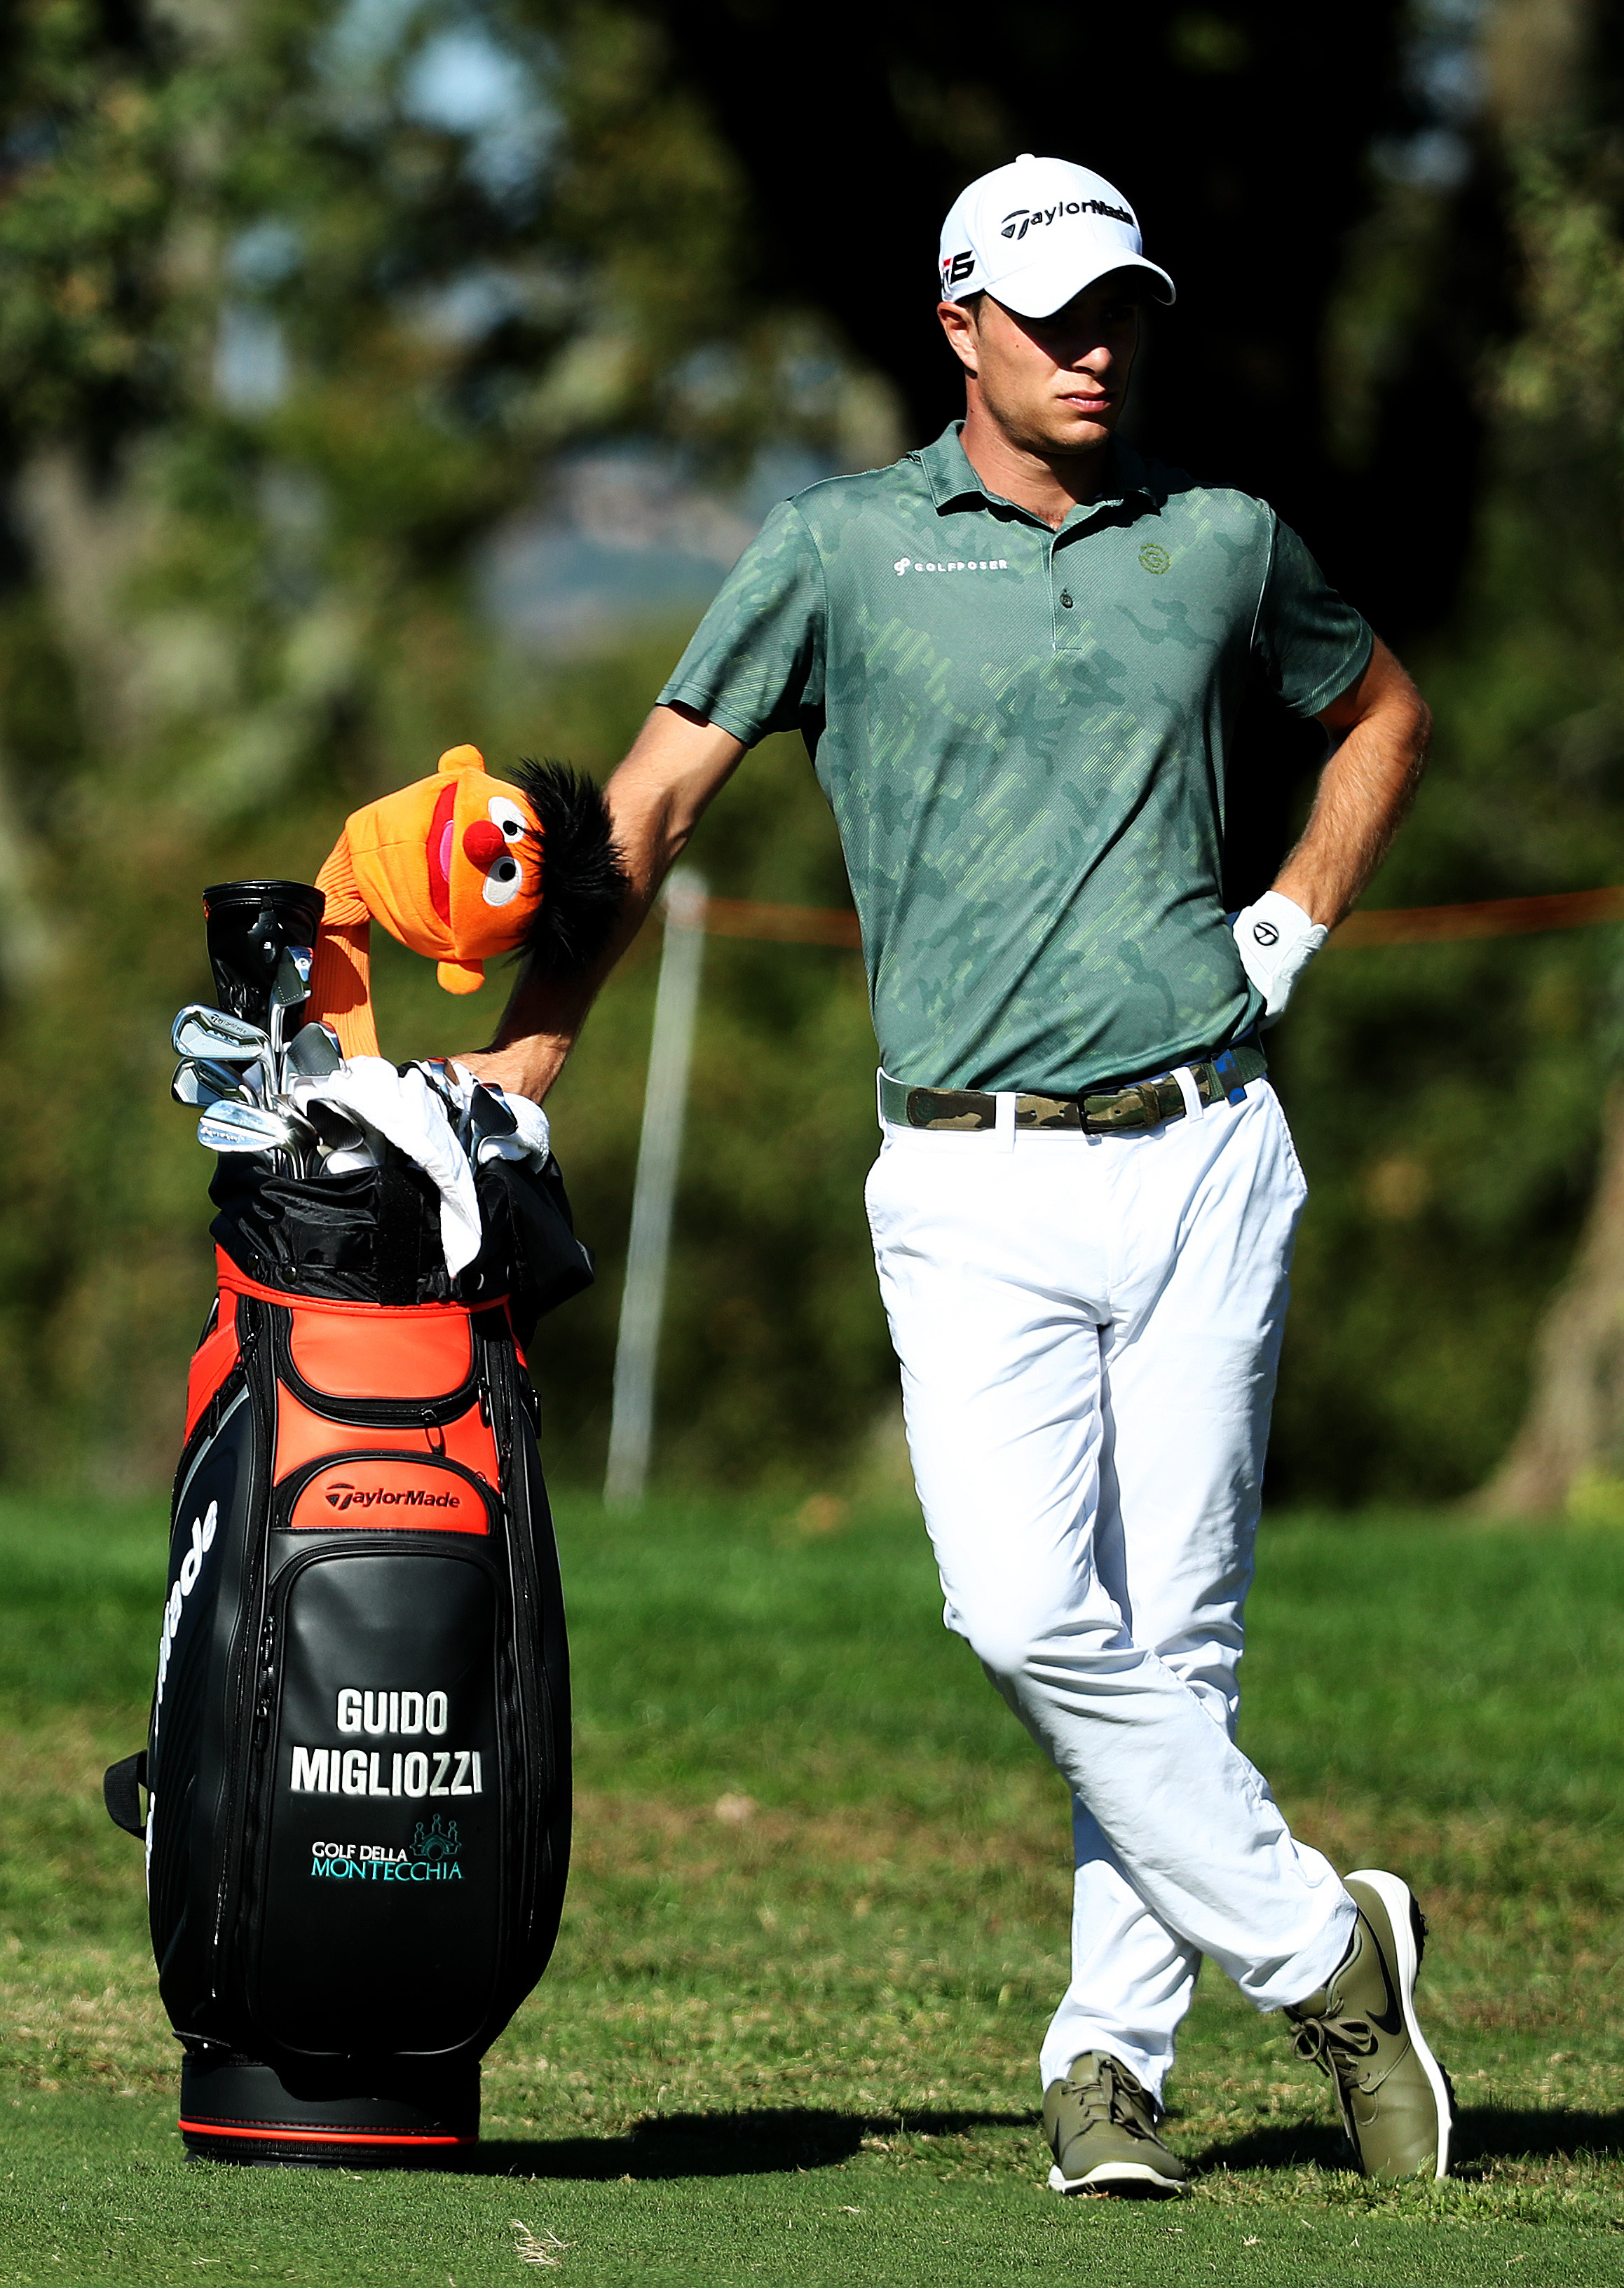 Guido Migliozzi on dream pairings with Rory McIlroy and Justin Rose